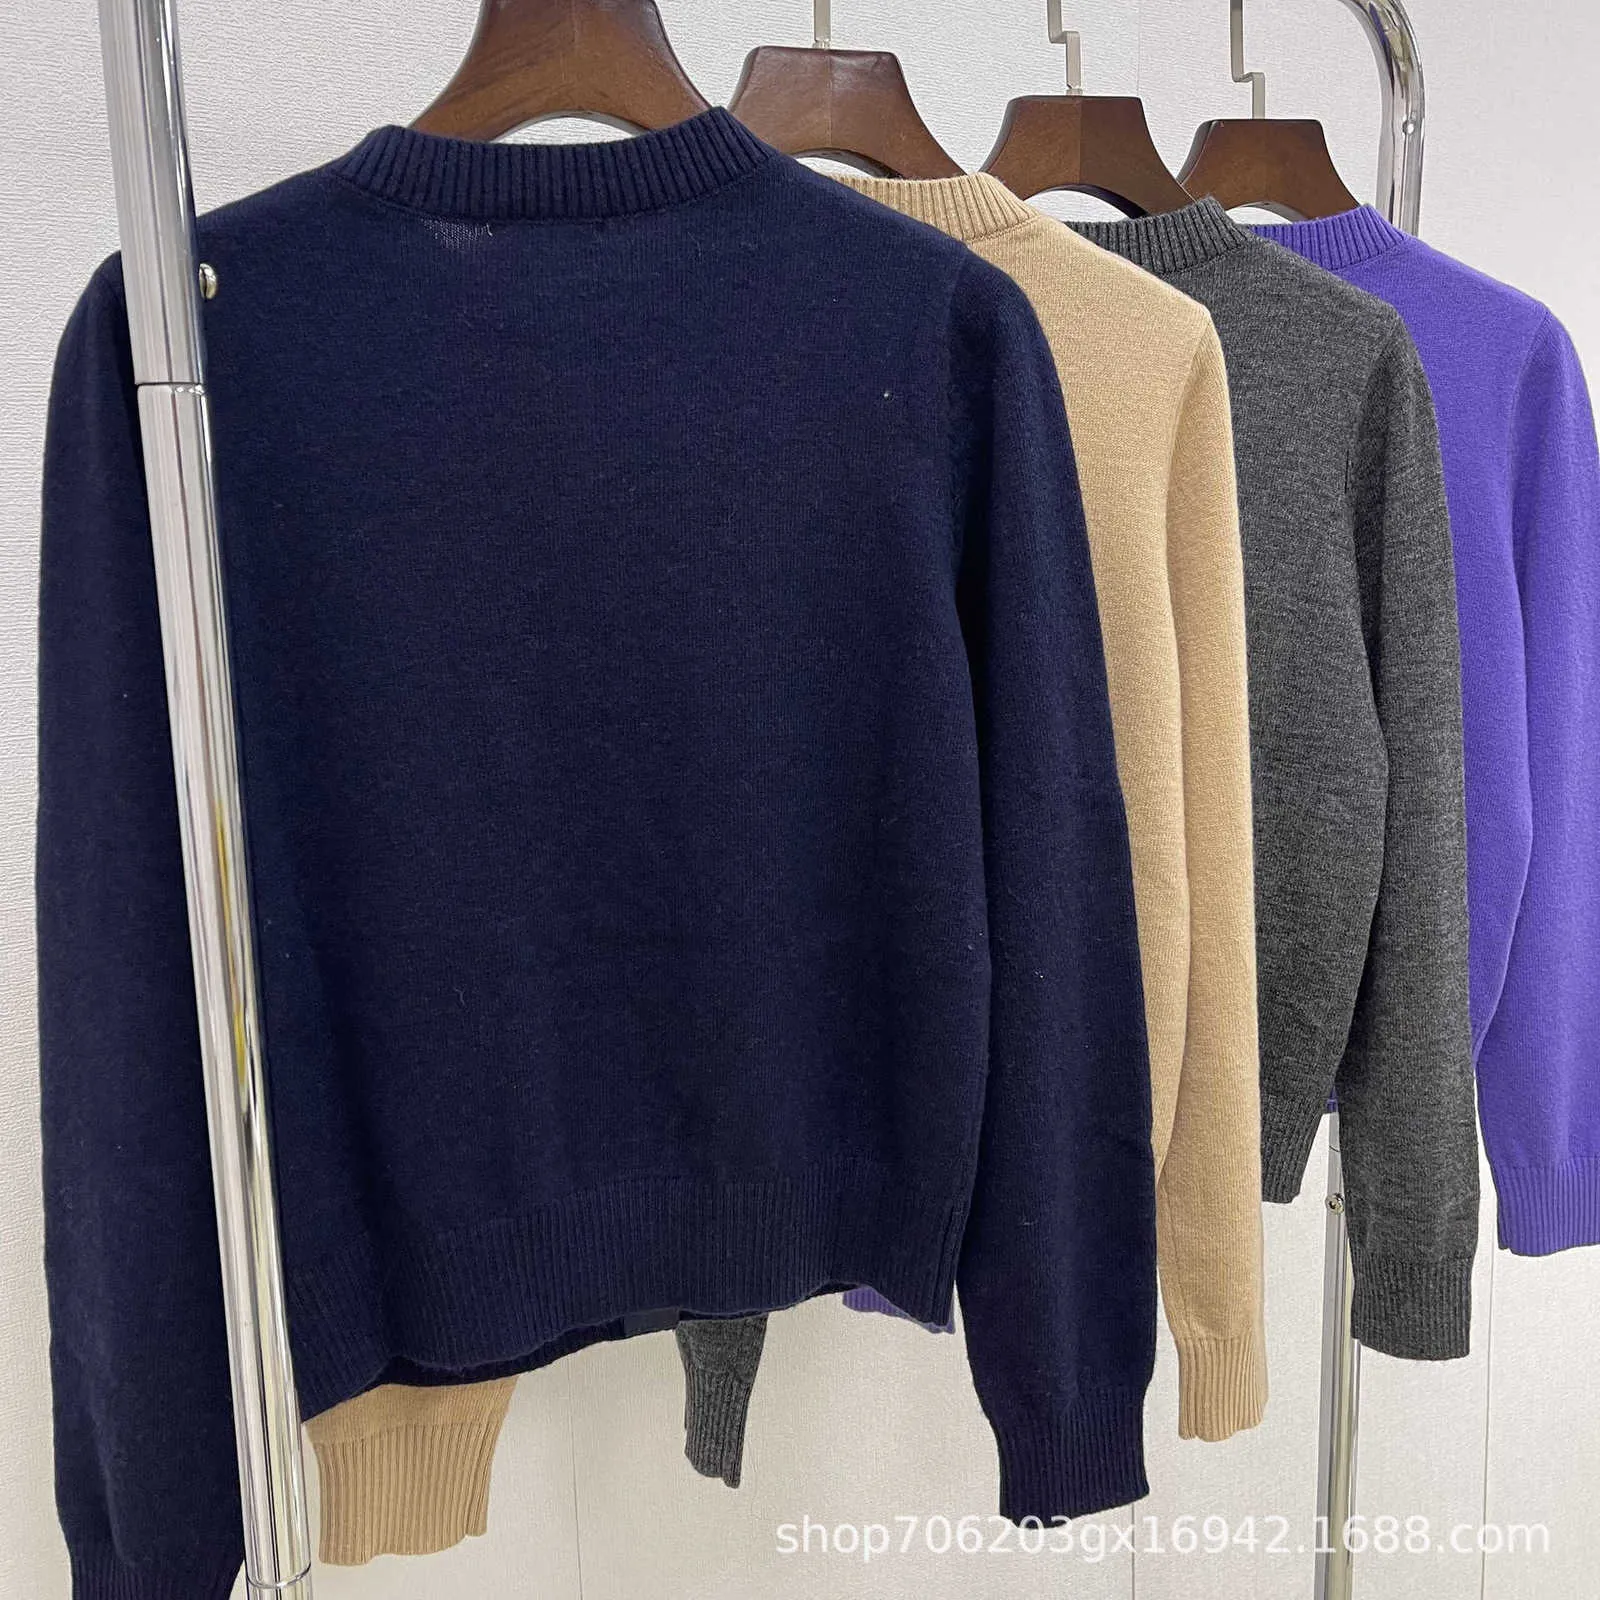 Women's Knits & Tees designer 23 Autumn/Winter MM cashmere macaron color series high-quality versatile fashionable round neck long sleeved sweater top LFSQ